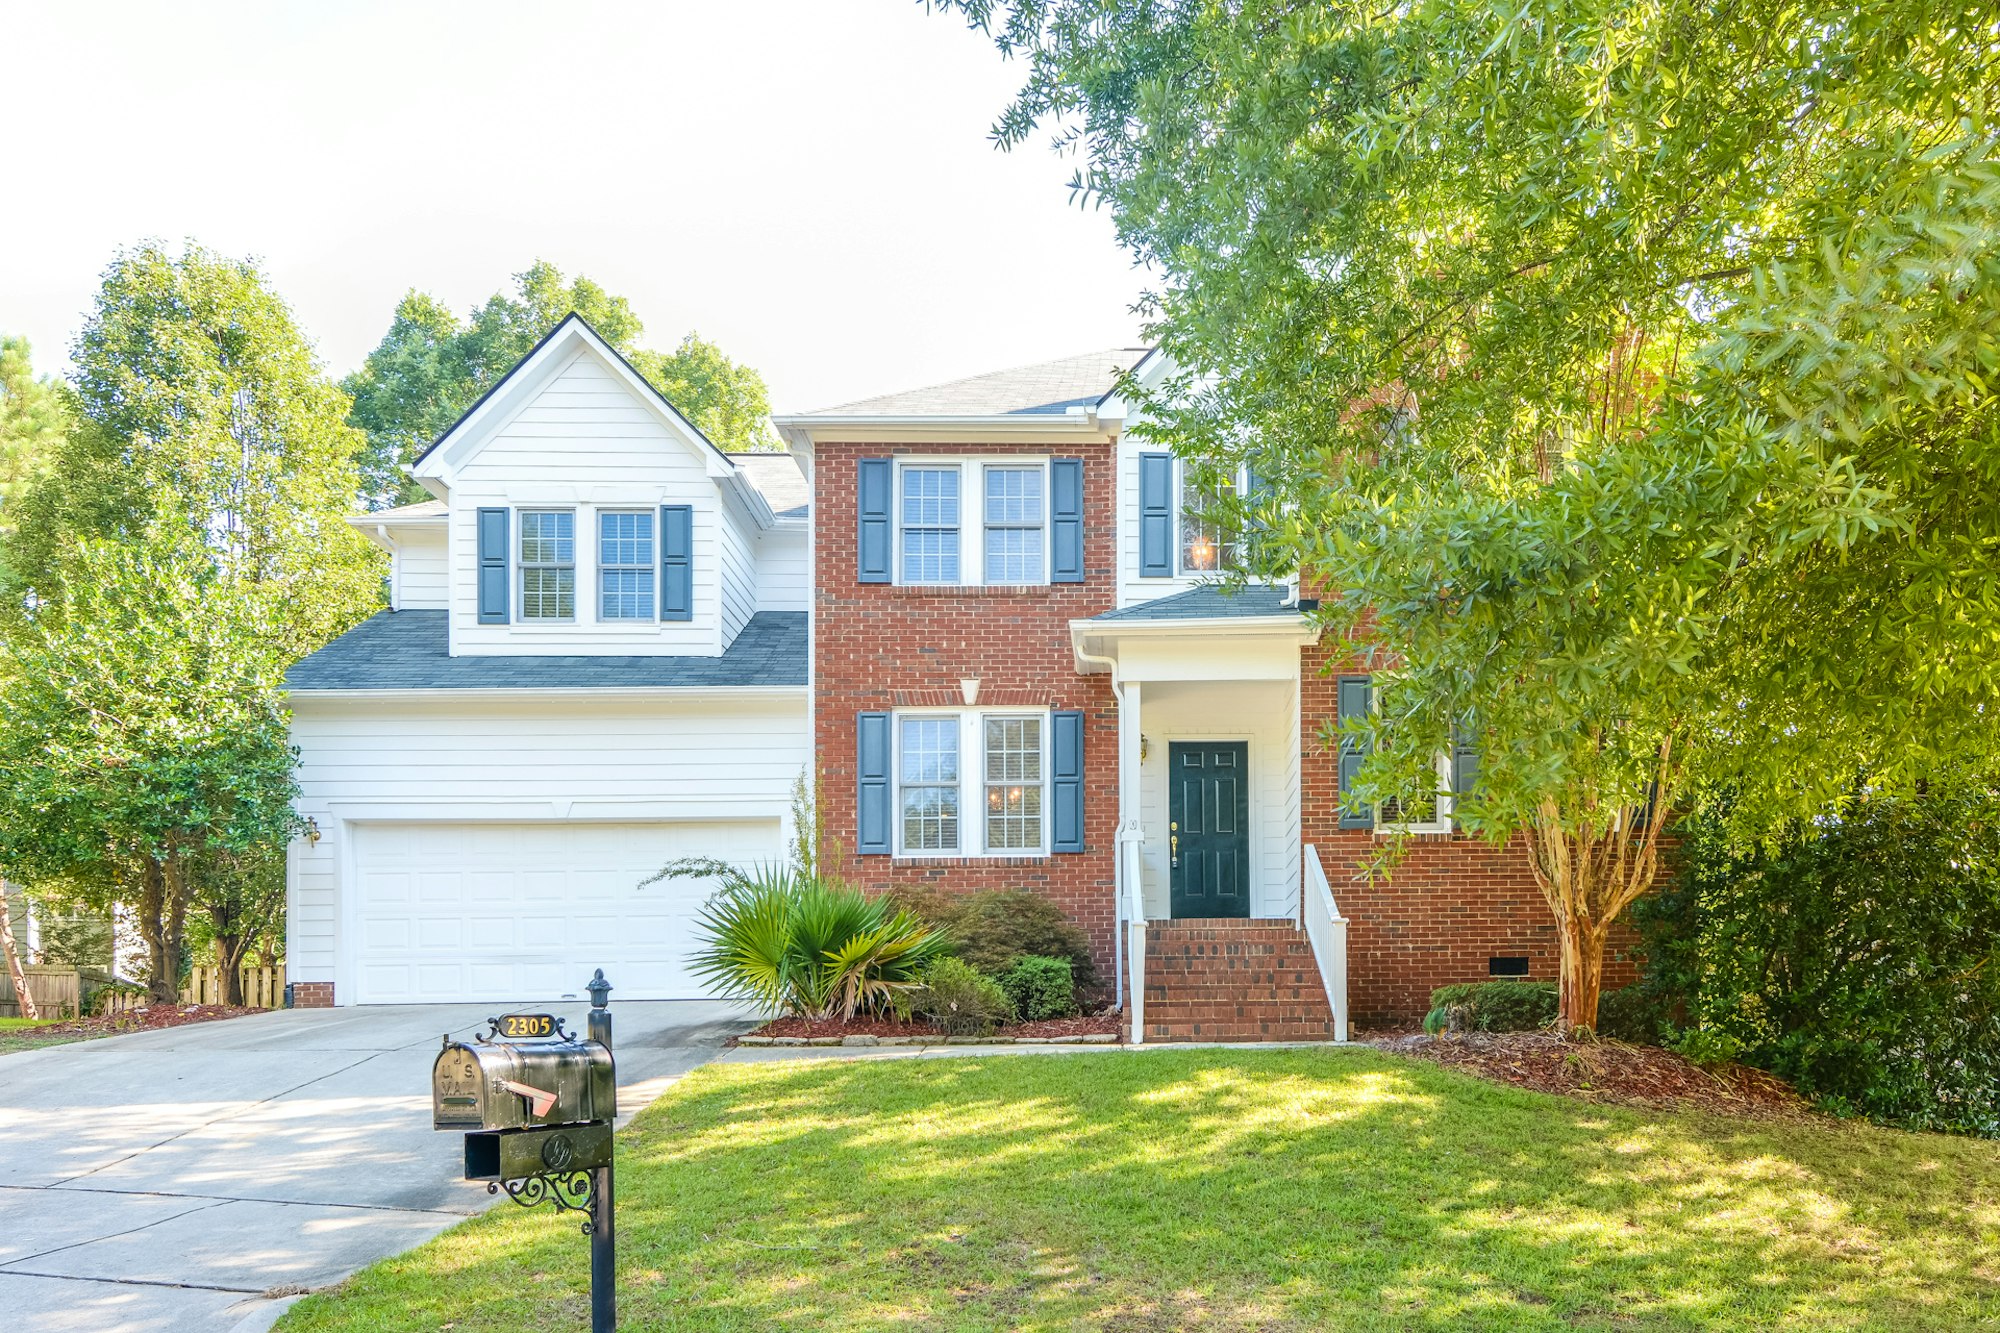 Photo 1 of 20 - 2305 Spruce Grove Ct, Raleigh, NC 27614